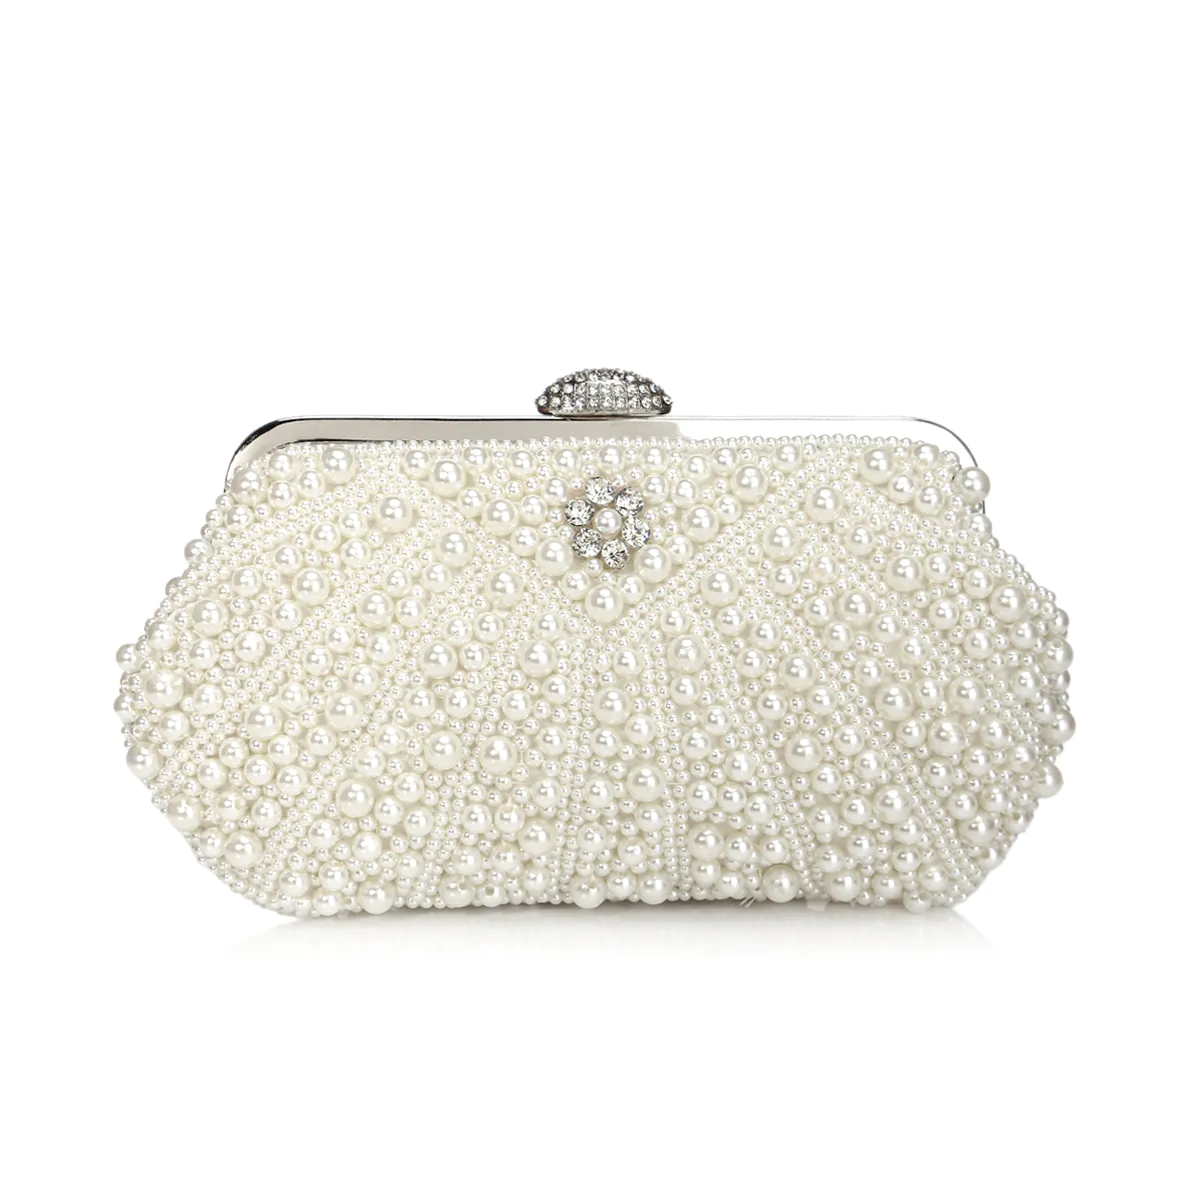 Pearl Beaded Evening Clutch Bag Purse for Wedding Party Prom01